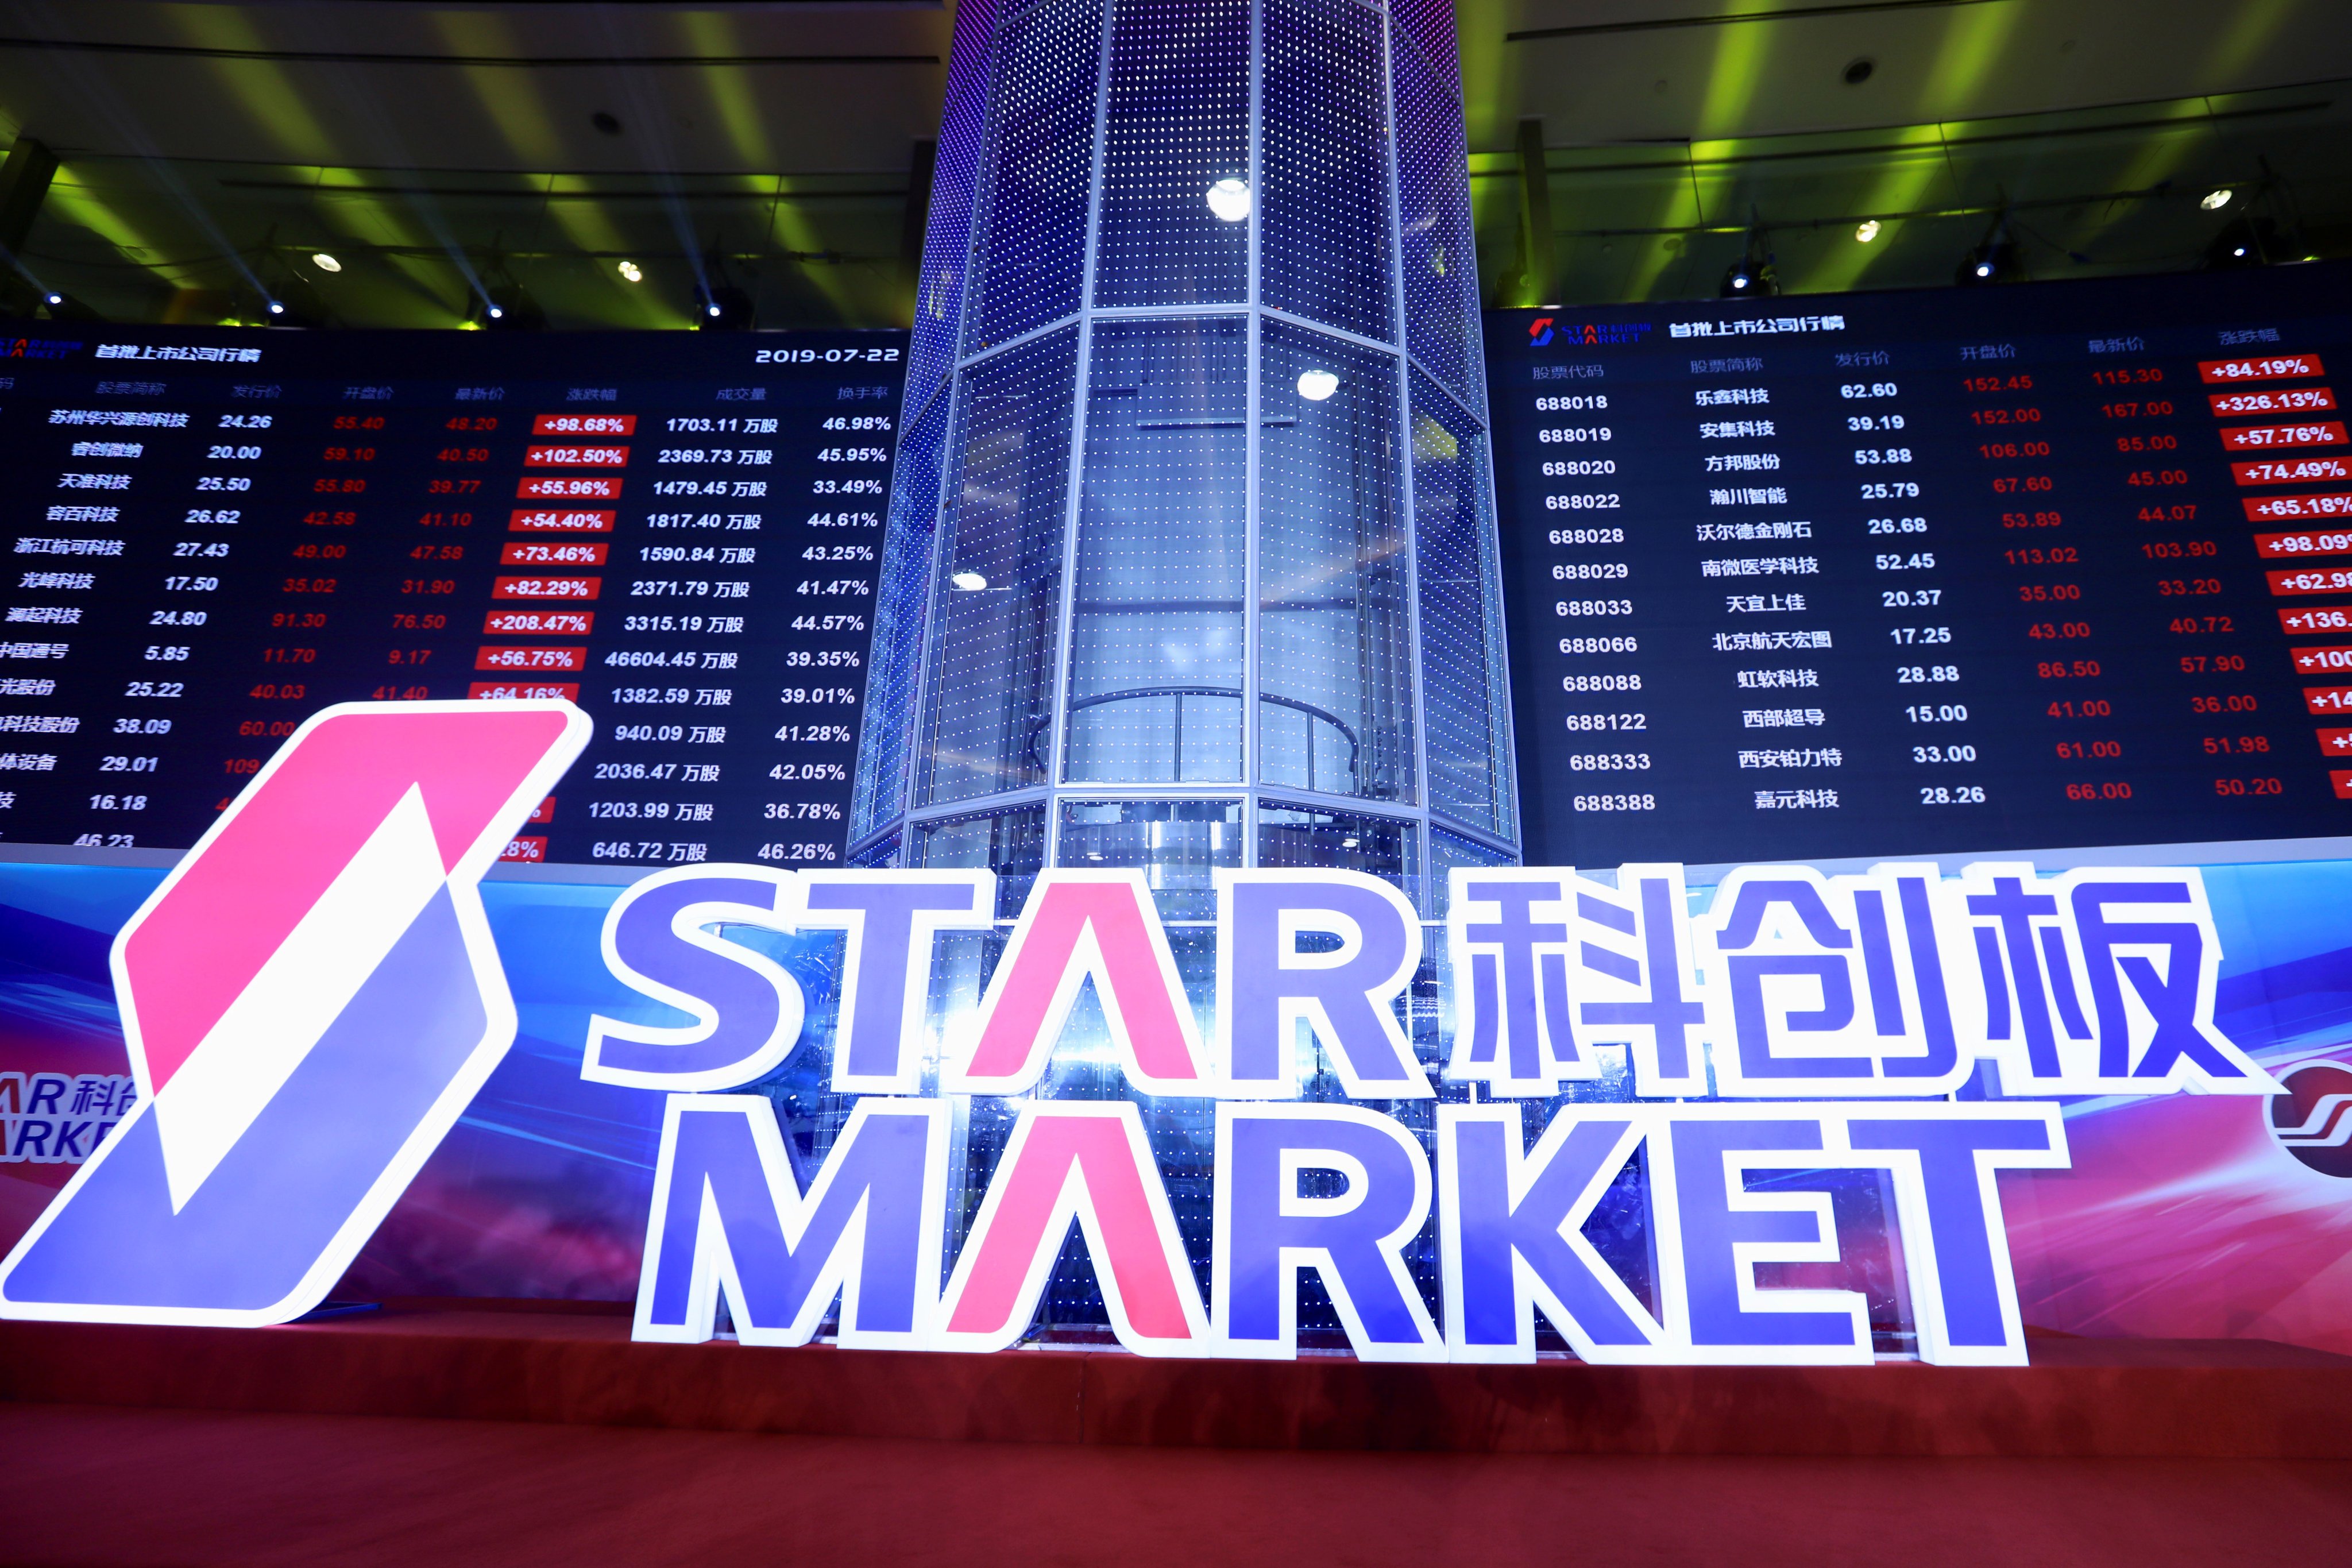 Hua Hong Semiconductor made a strong debut on Shanghai’s Star Market on Monday. Photo: Reuters